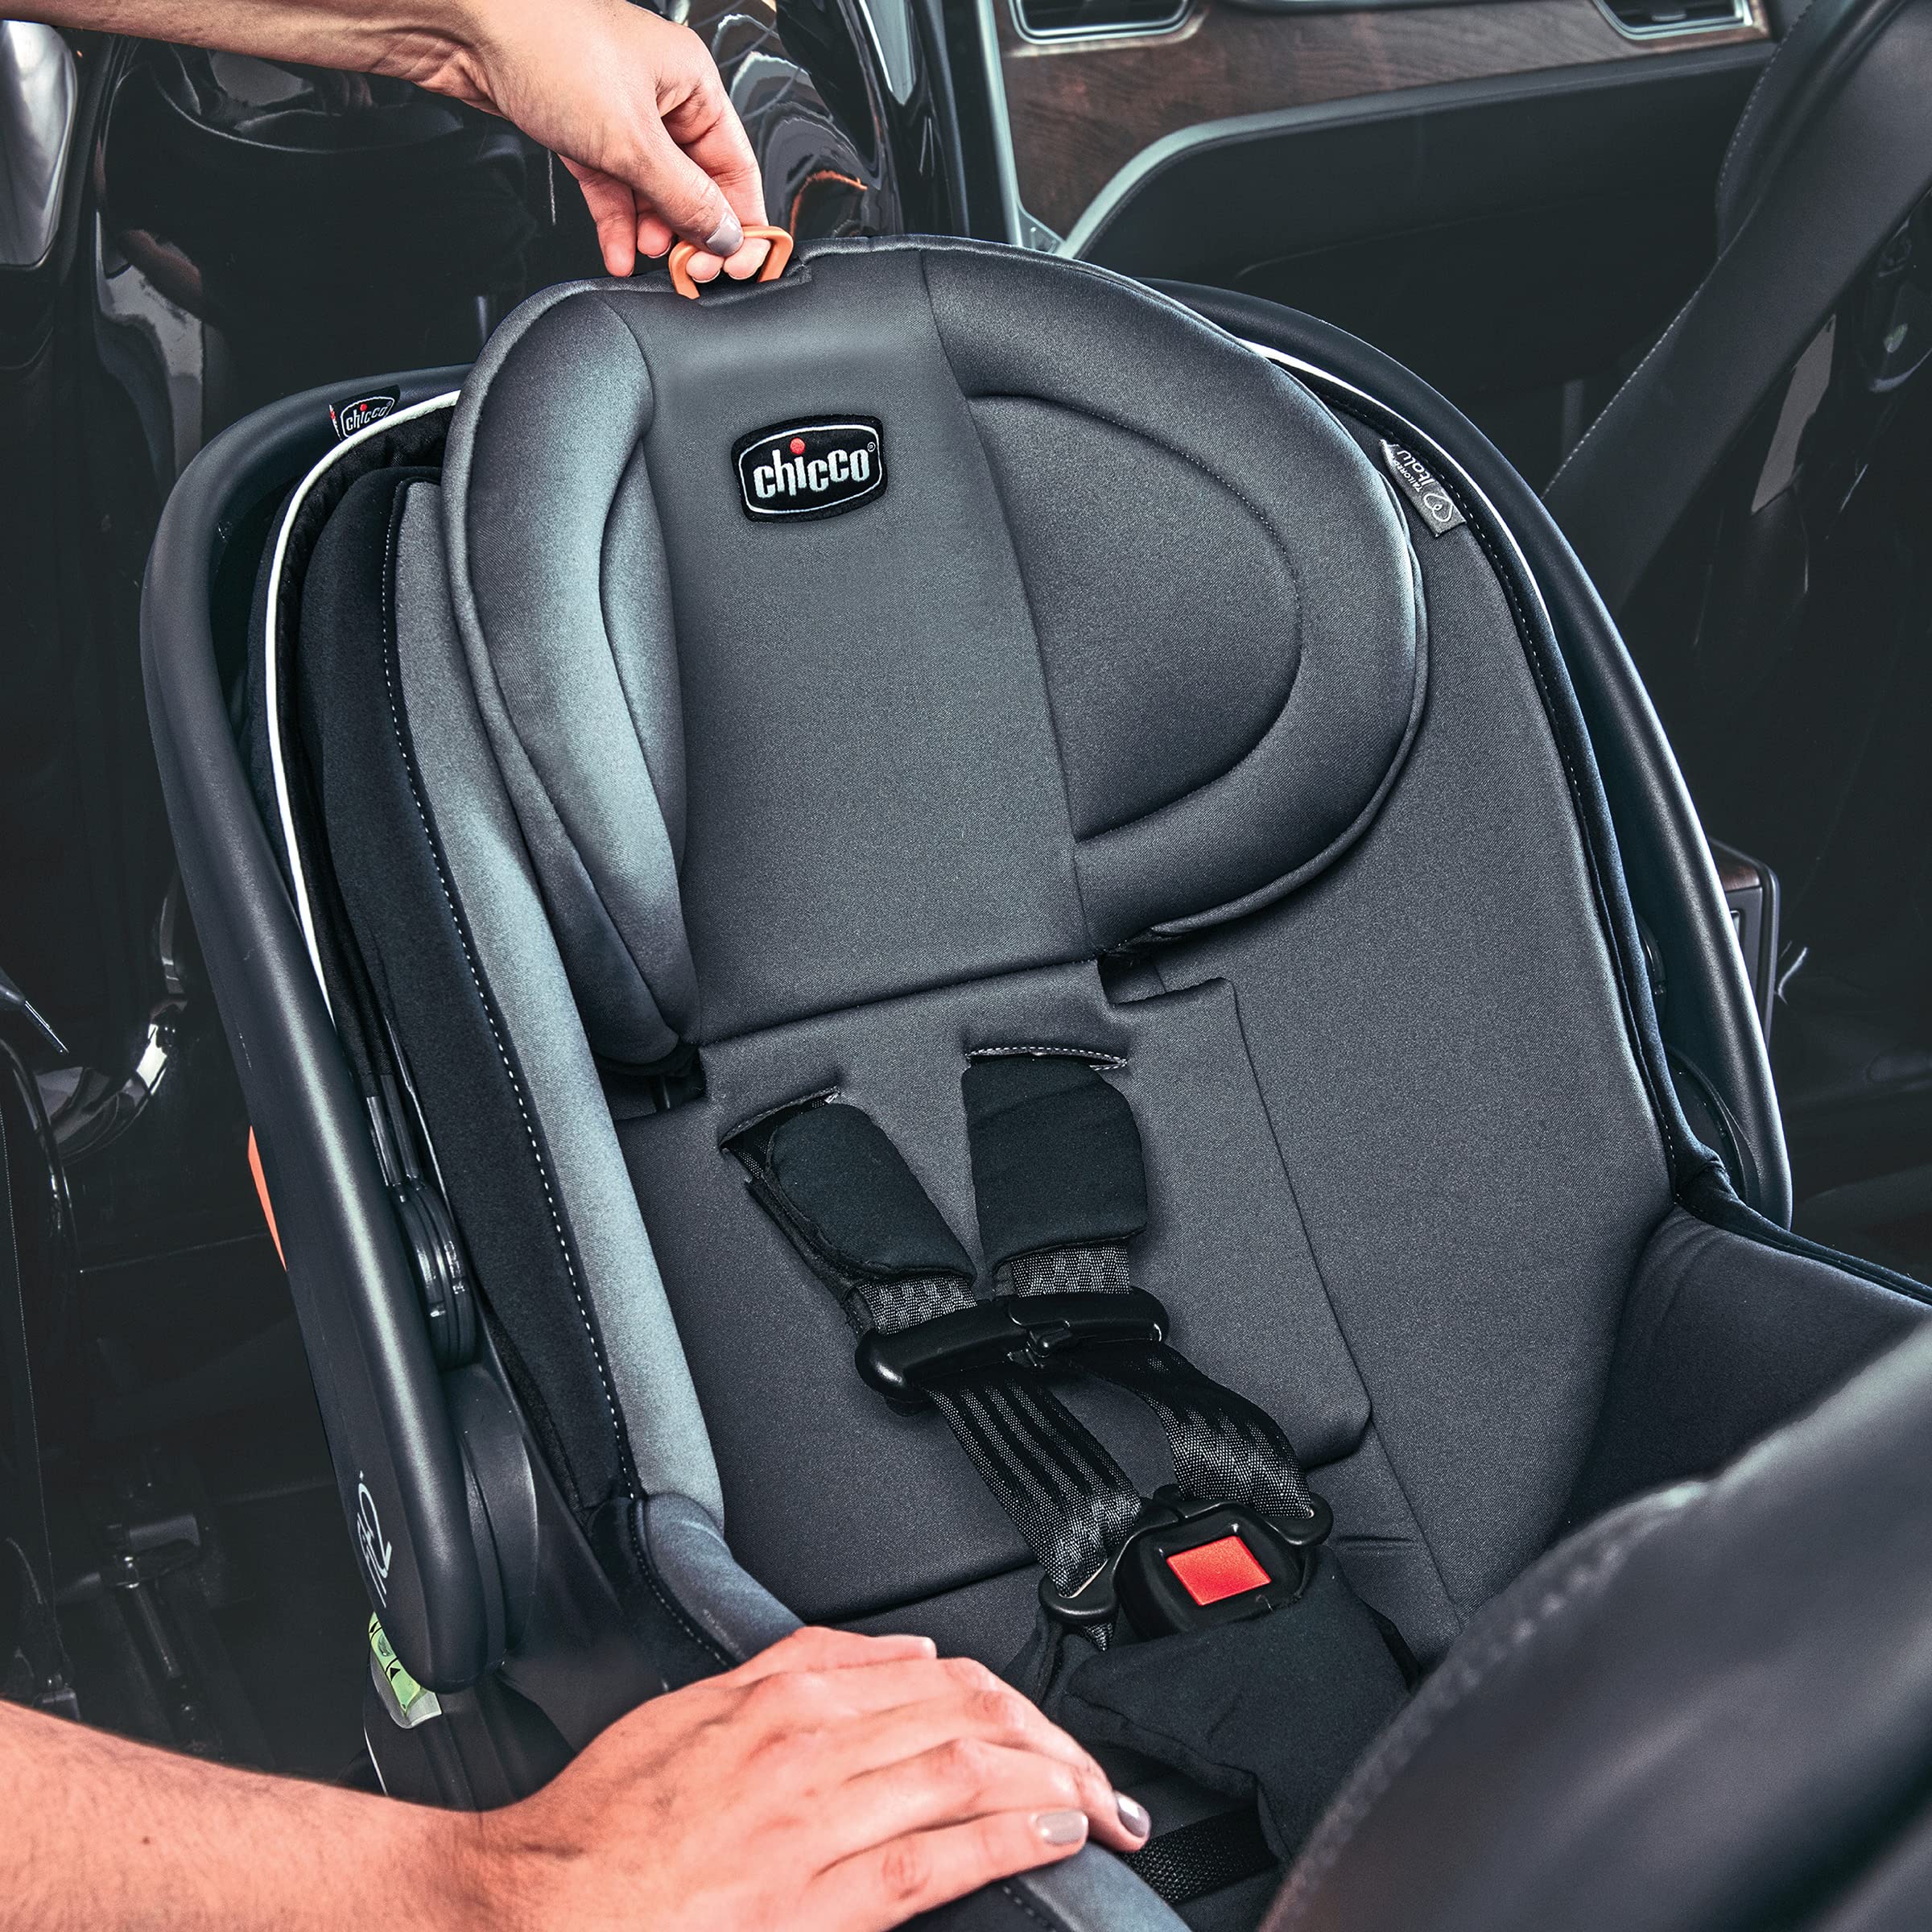 Chicco Fit2 Adapt Infant and Toddler Car Seat and Base, Rear-Facing Seat for Infants and Toddlers 4-35 lbs., Includes Infant Head and Body Support, Compatible with Chicco Strollers | Ember/Black